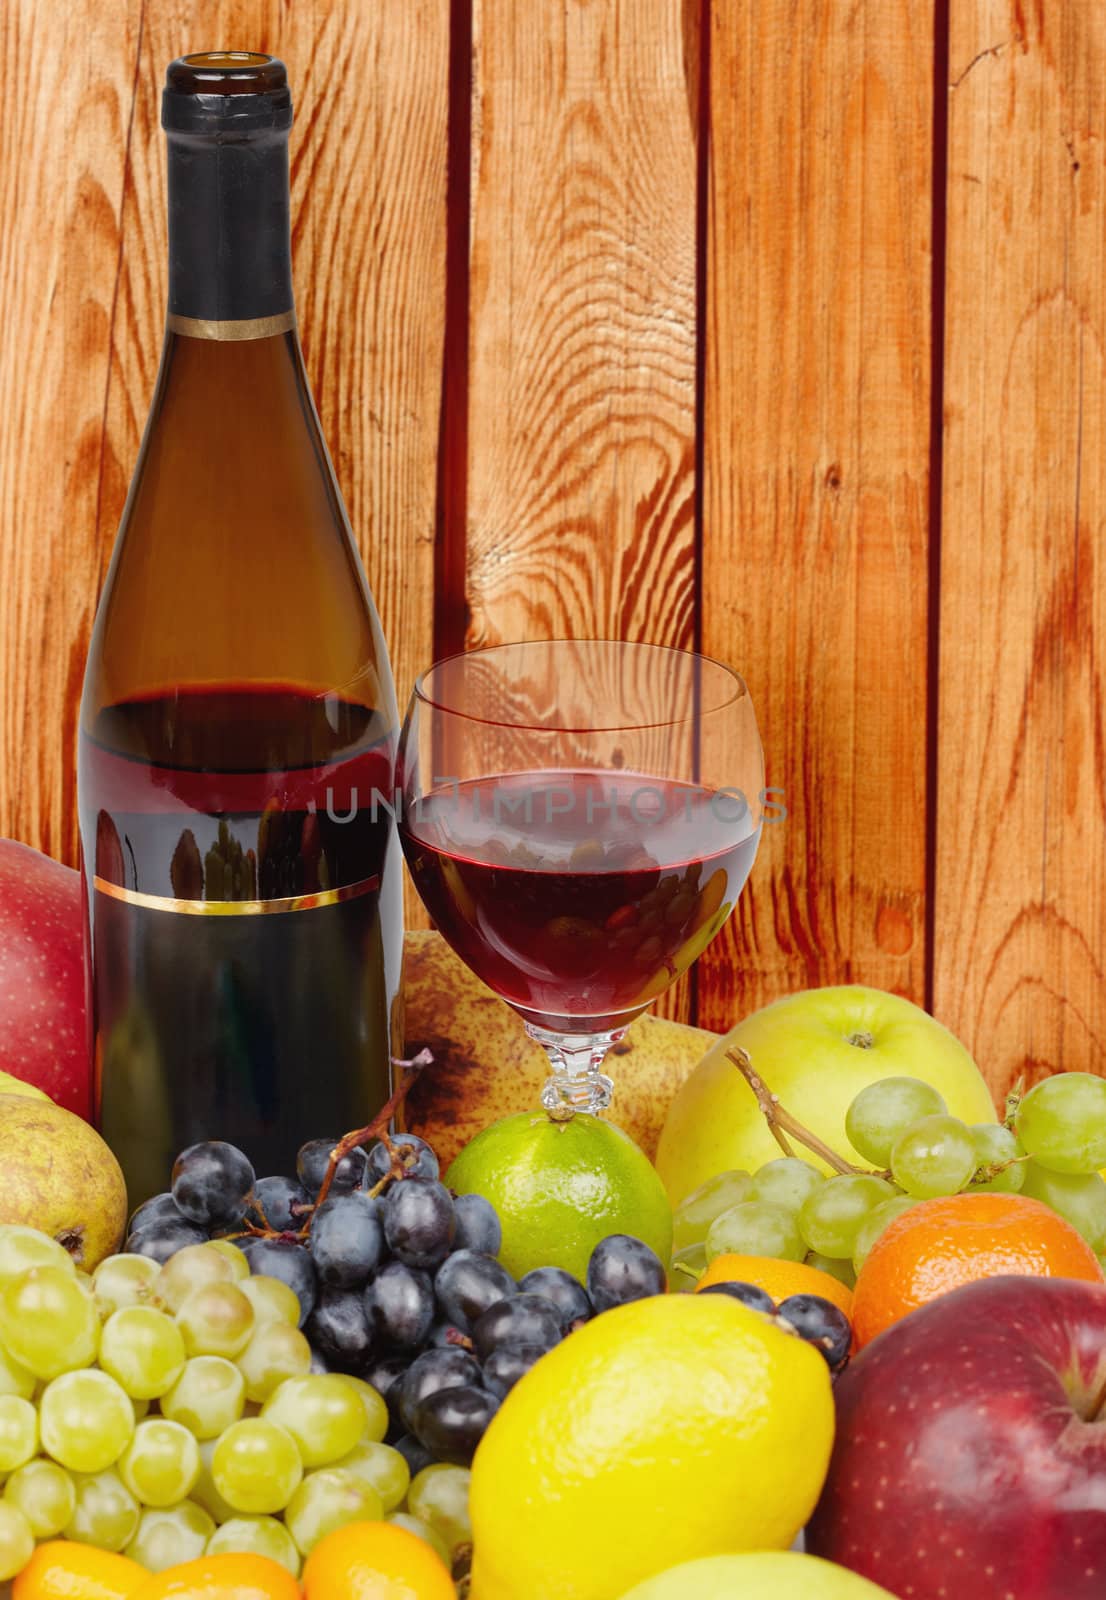 Wine and fruits on a background of wooden wall